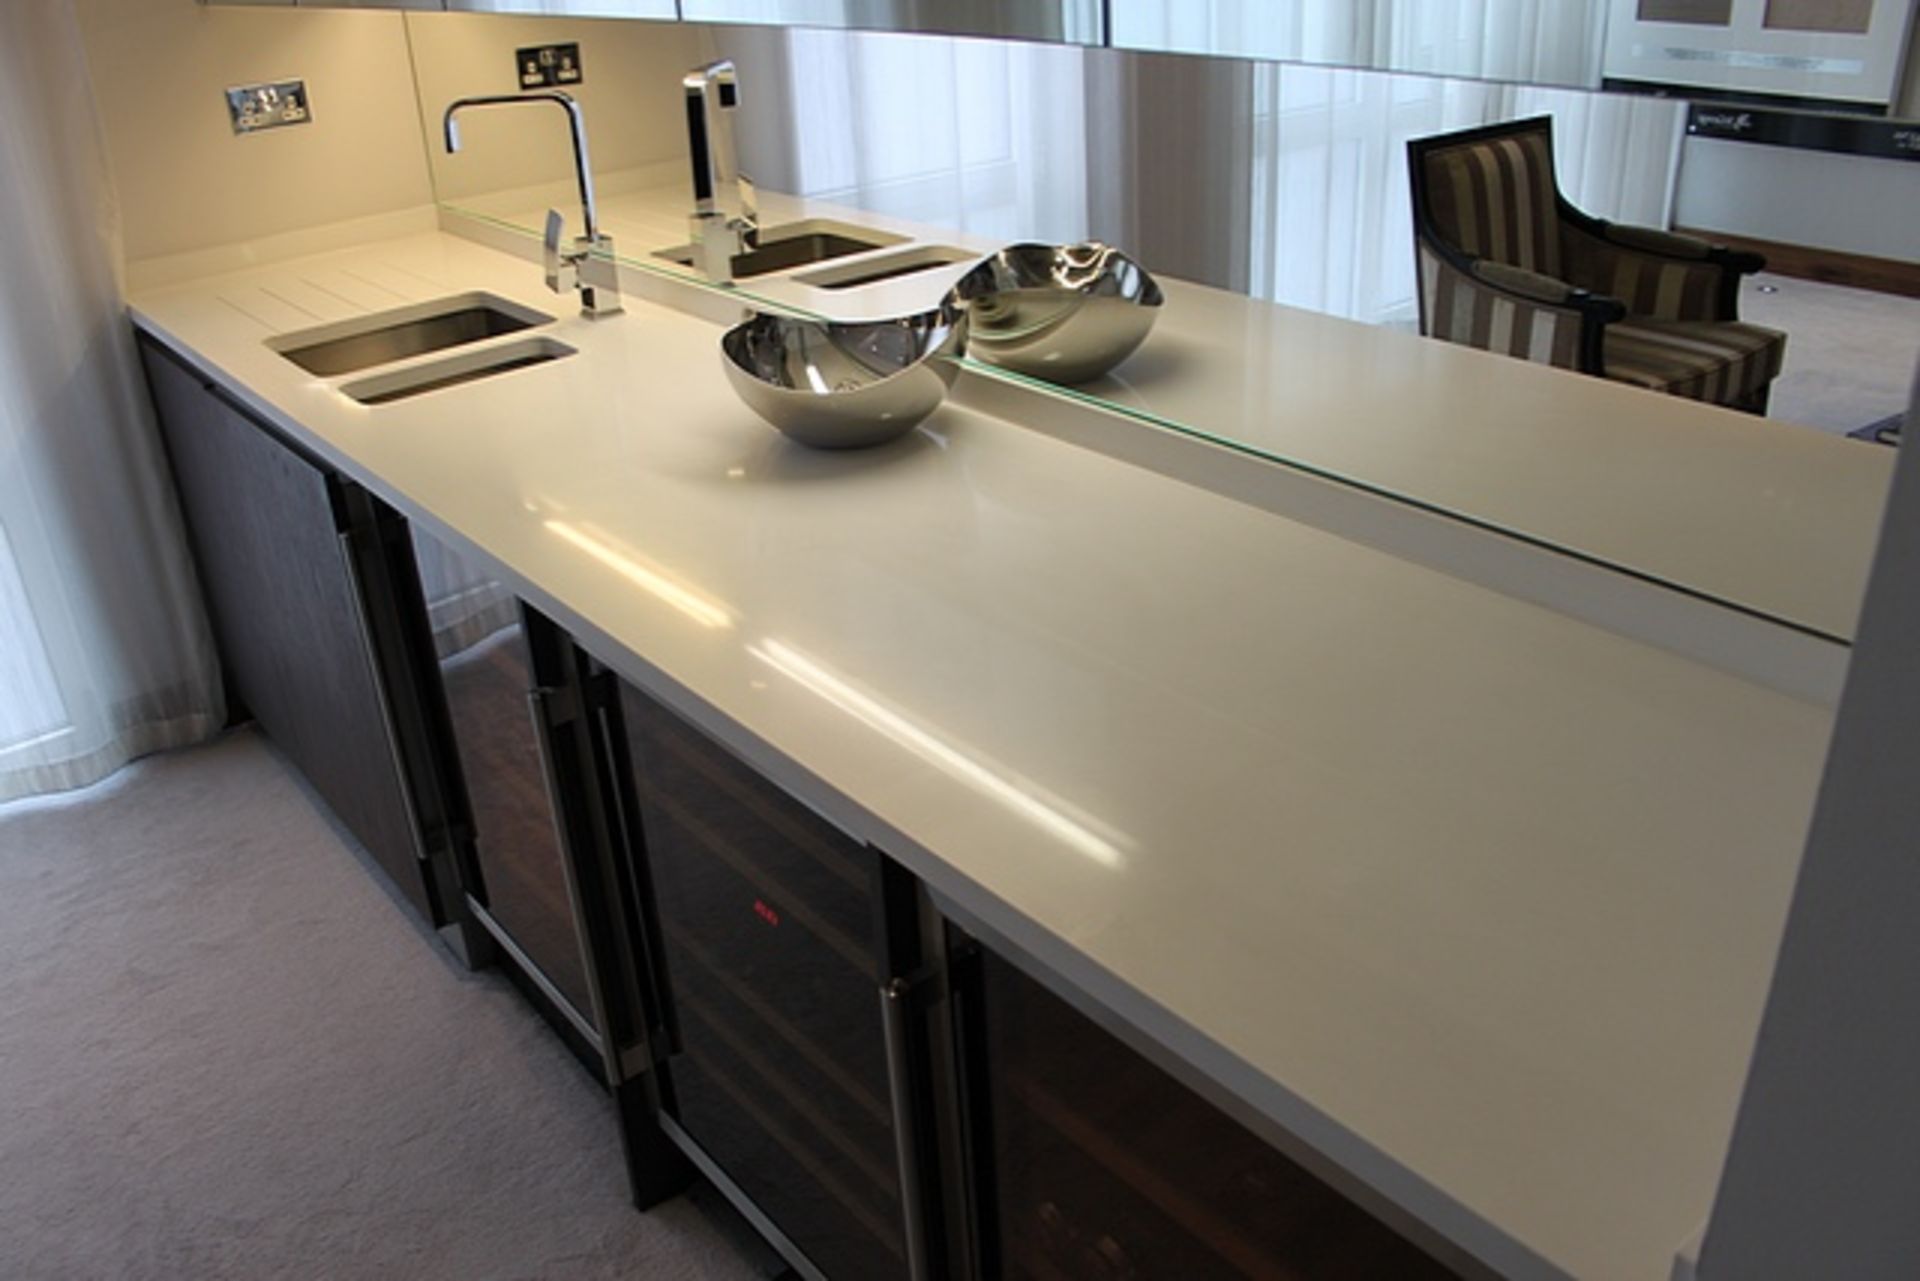 Stone worktop counter surface with integral stainless basin and mixer tap 2940mm x 630mm complete - Image 4 of 5